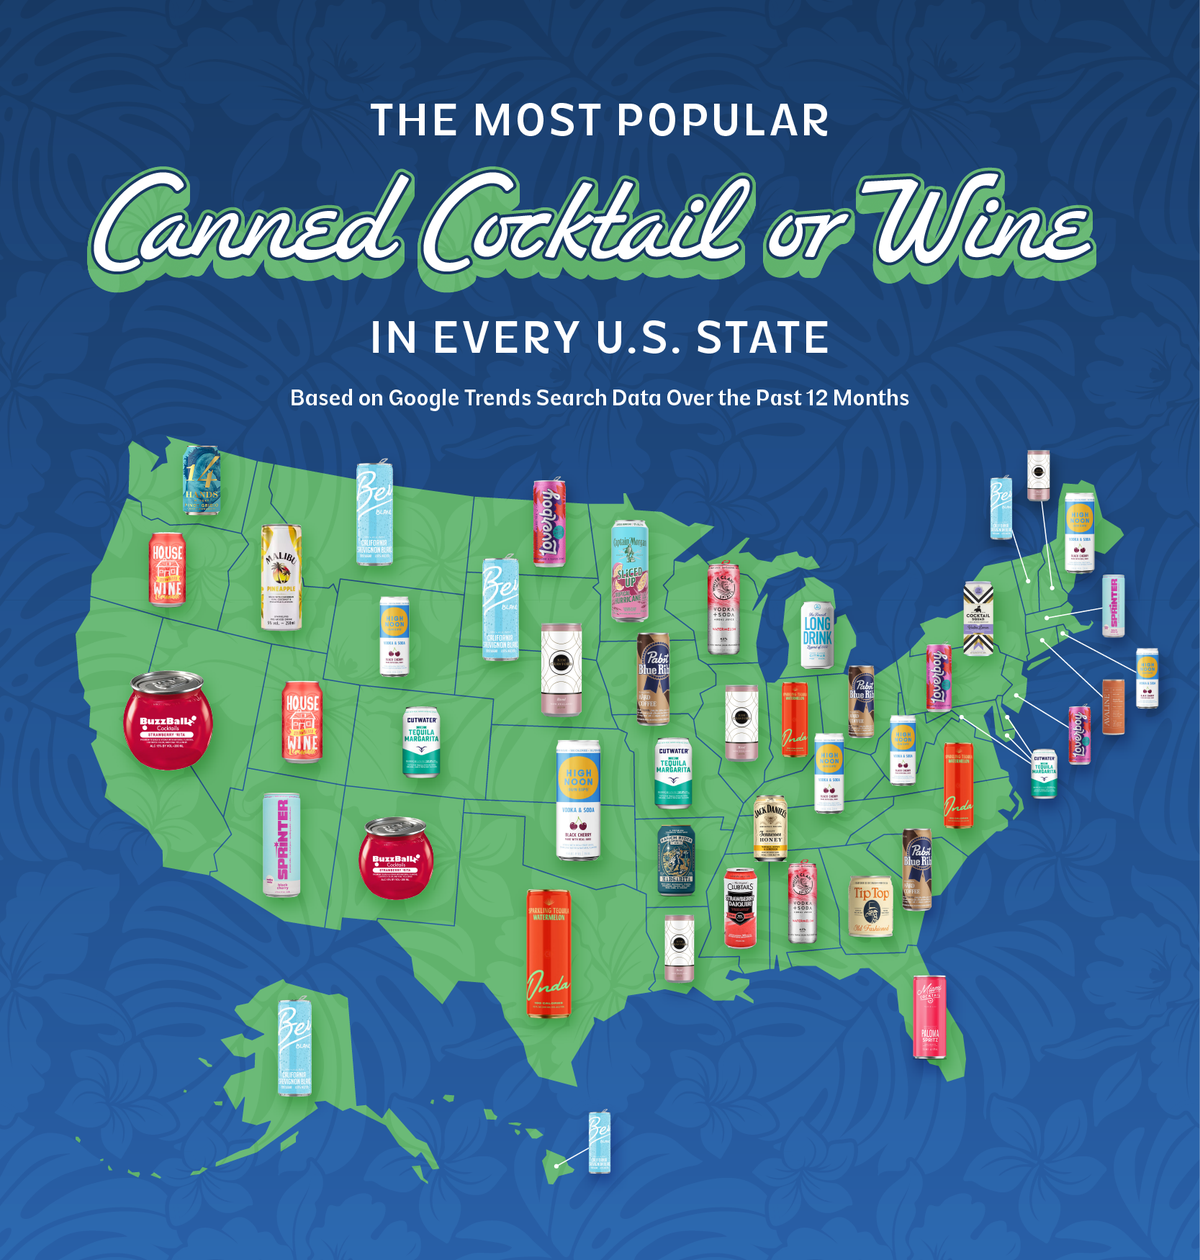 Most popular canned cocktail or wine in every US state